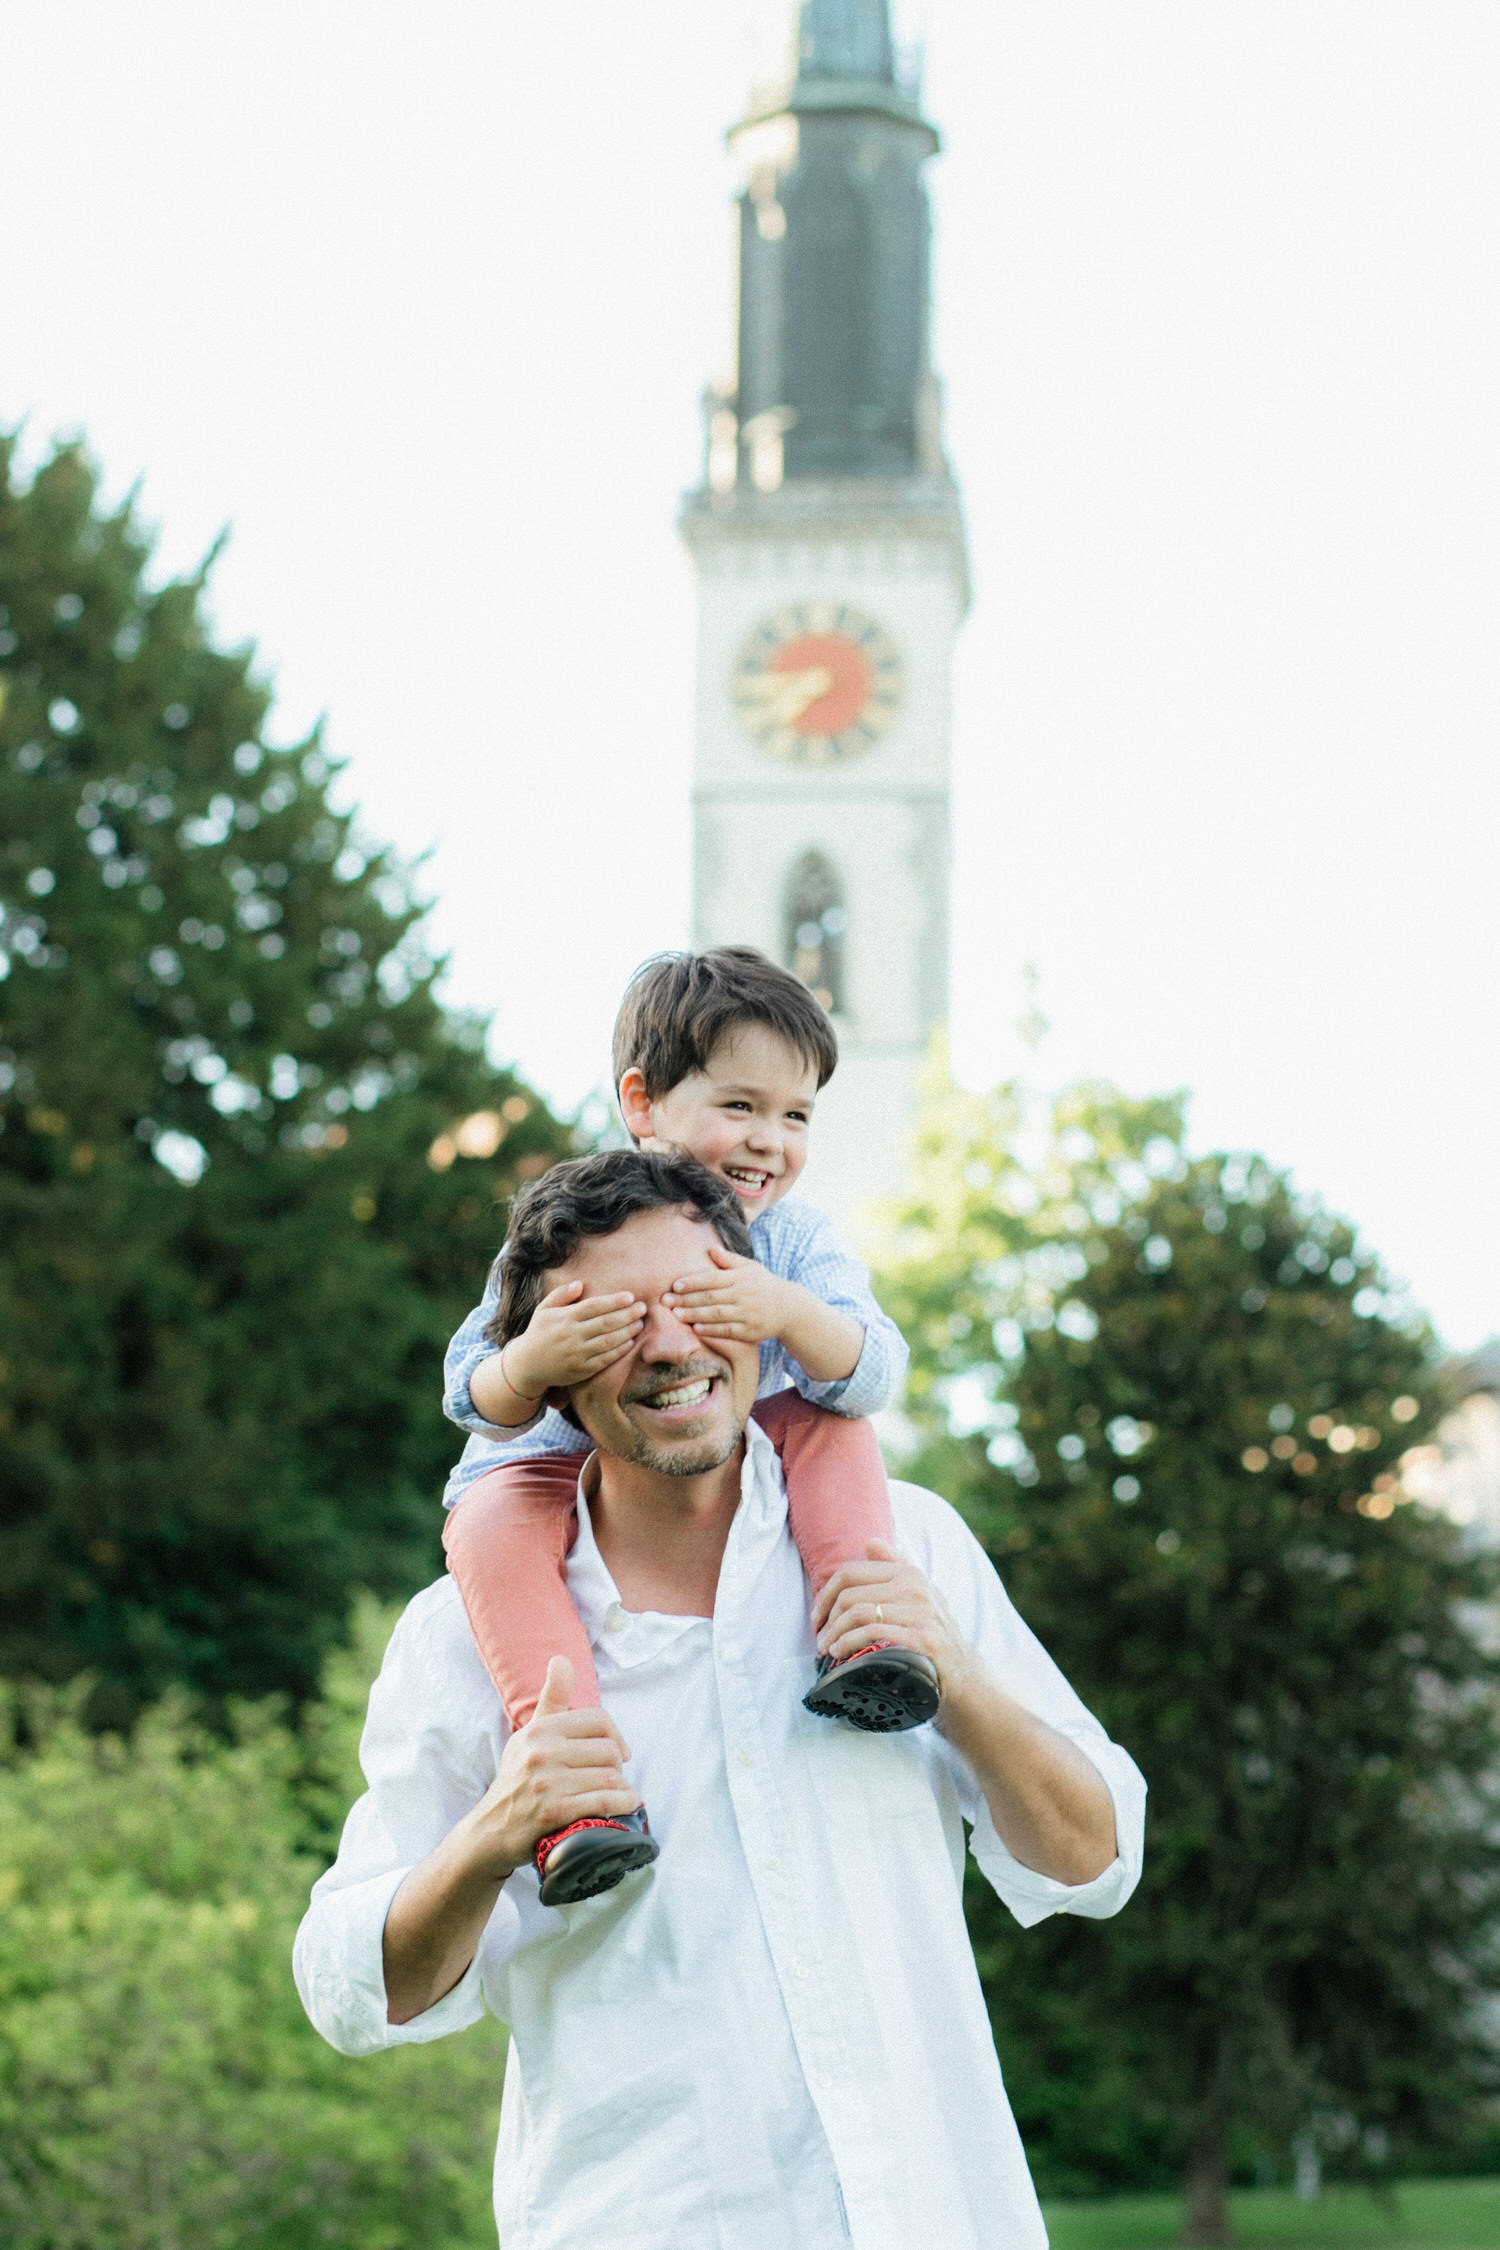 Your Family Photography Sessions in Zug